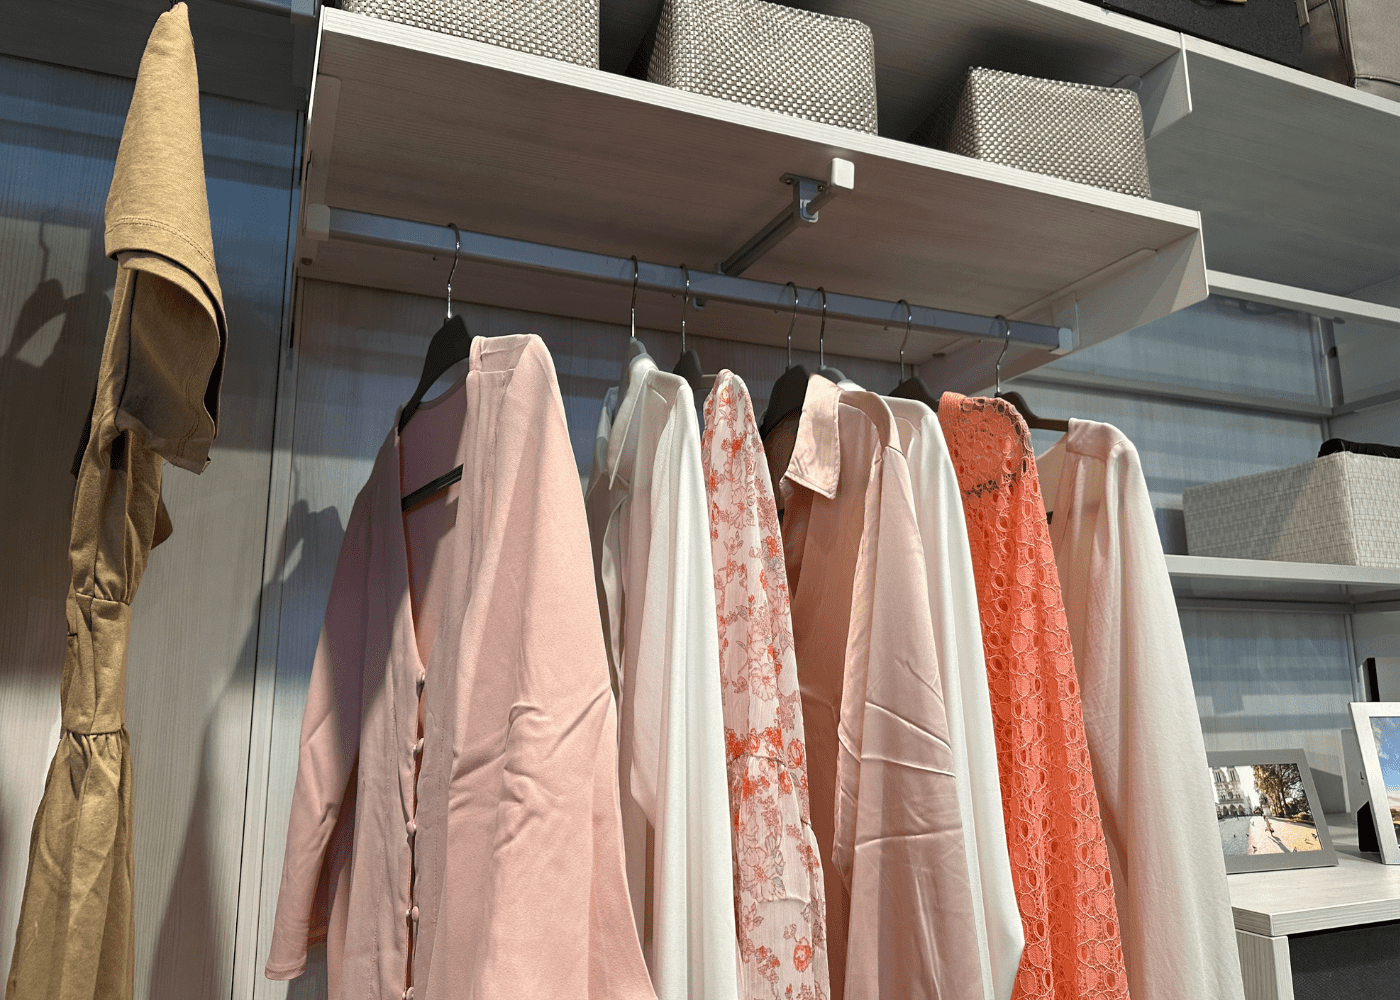 Clothing hanging on a bar in a small closet.